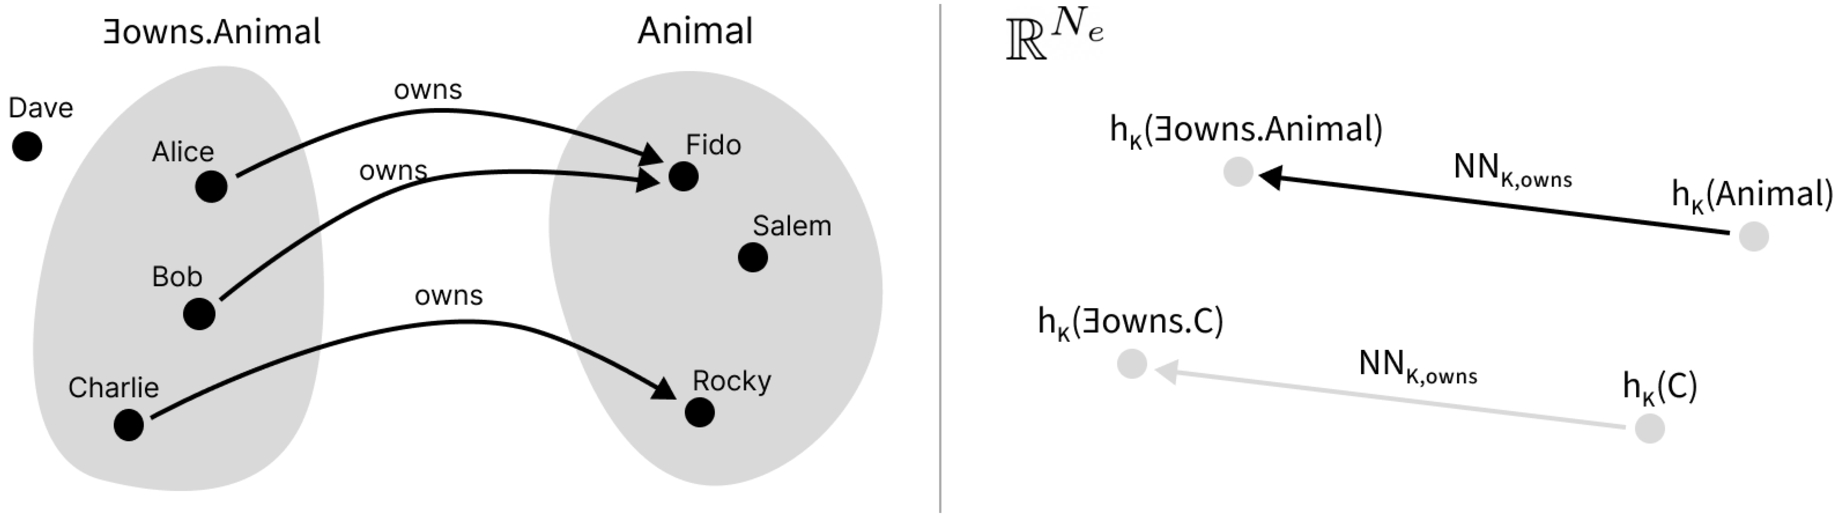 An example interpretation of a knowledge base with role assertions is shown on the left side. The individuals Fido, Salem, and Rocky are elements of the set AnimalI. Individuals Alice, Bob, and Charlie are elements of set (∃owns.Animal)I. An illustration of transformations from concept embeddings to existential restriction embeddings is shown on the right side. The embedding of ∃owns.C may be obtained by applying NNK,owns to the embedding of concept C.